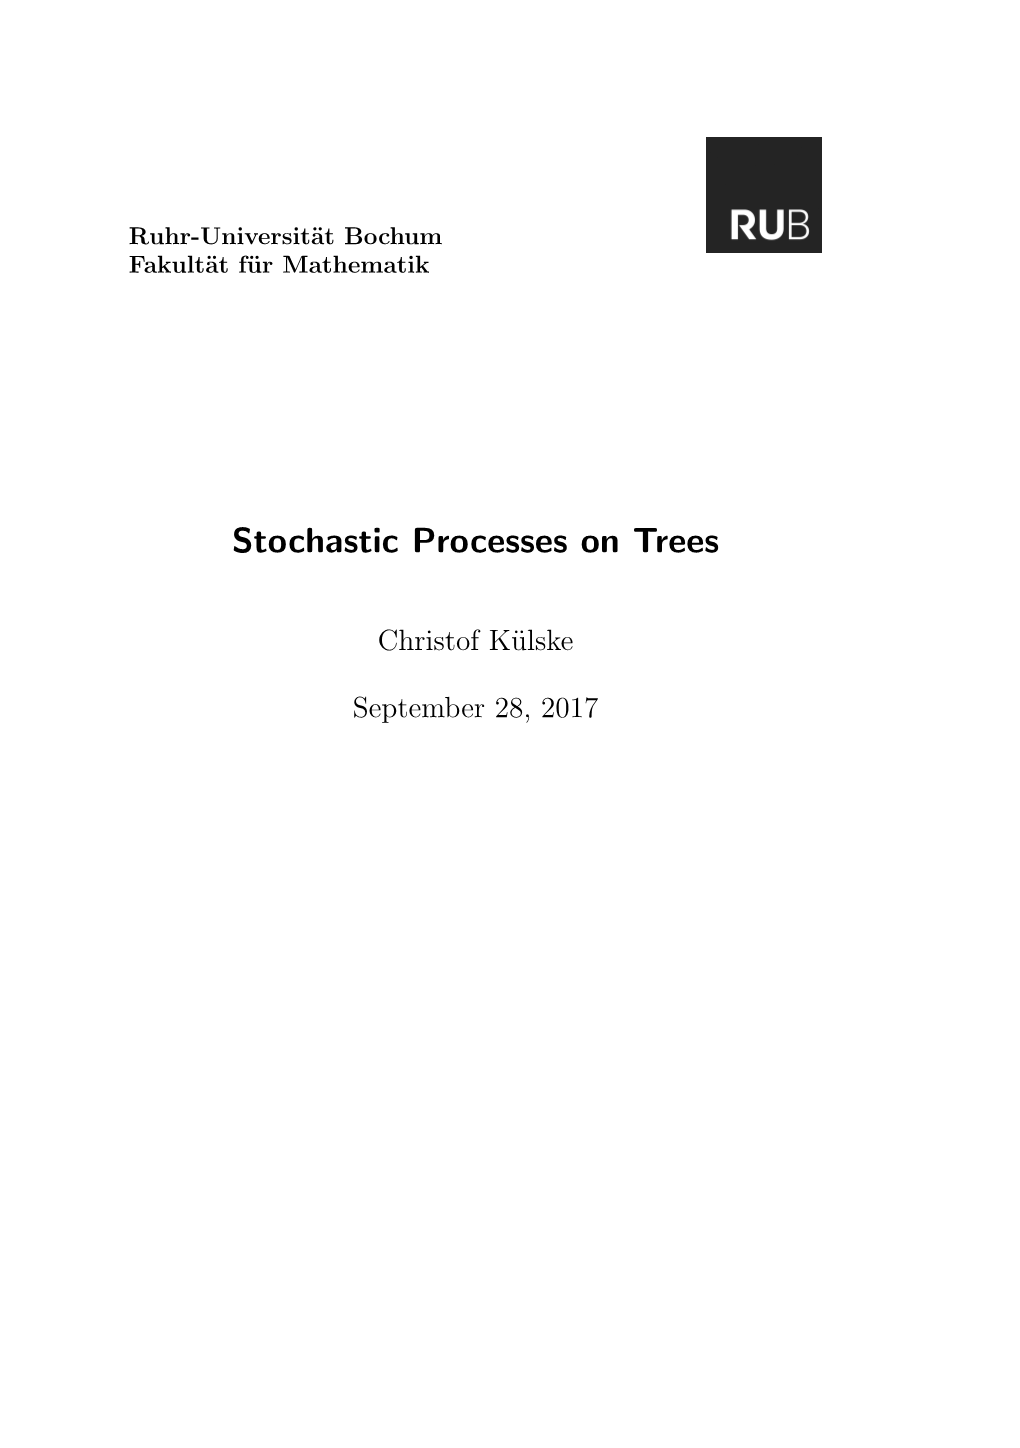 Stochastic Processes on Trees